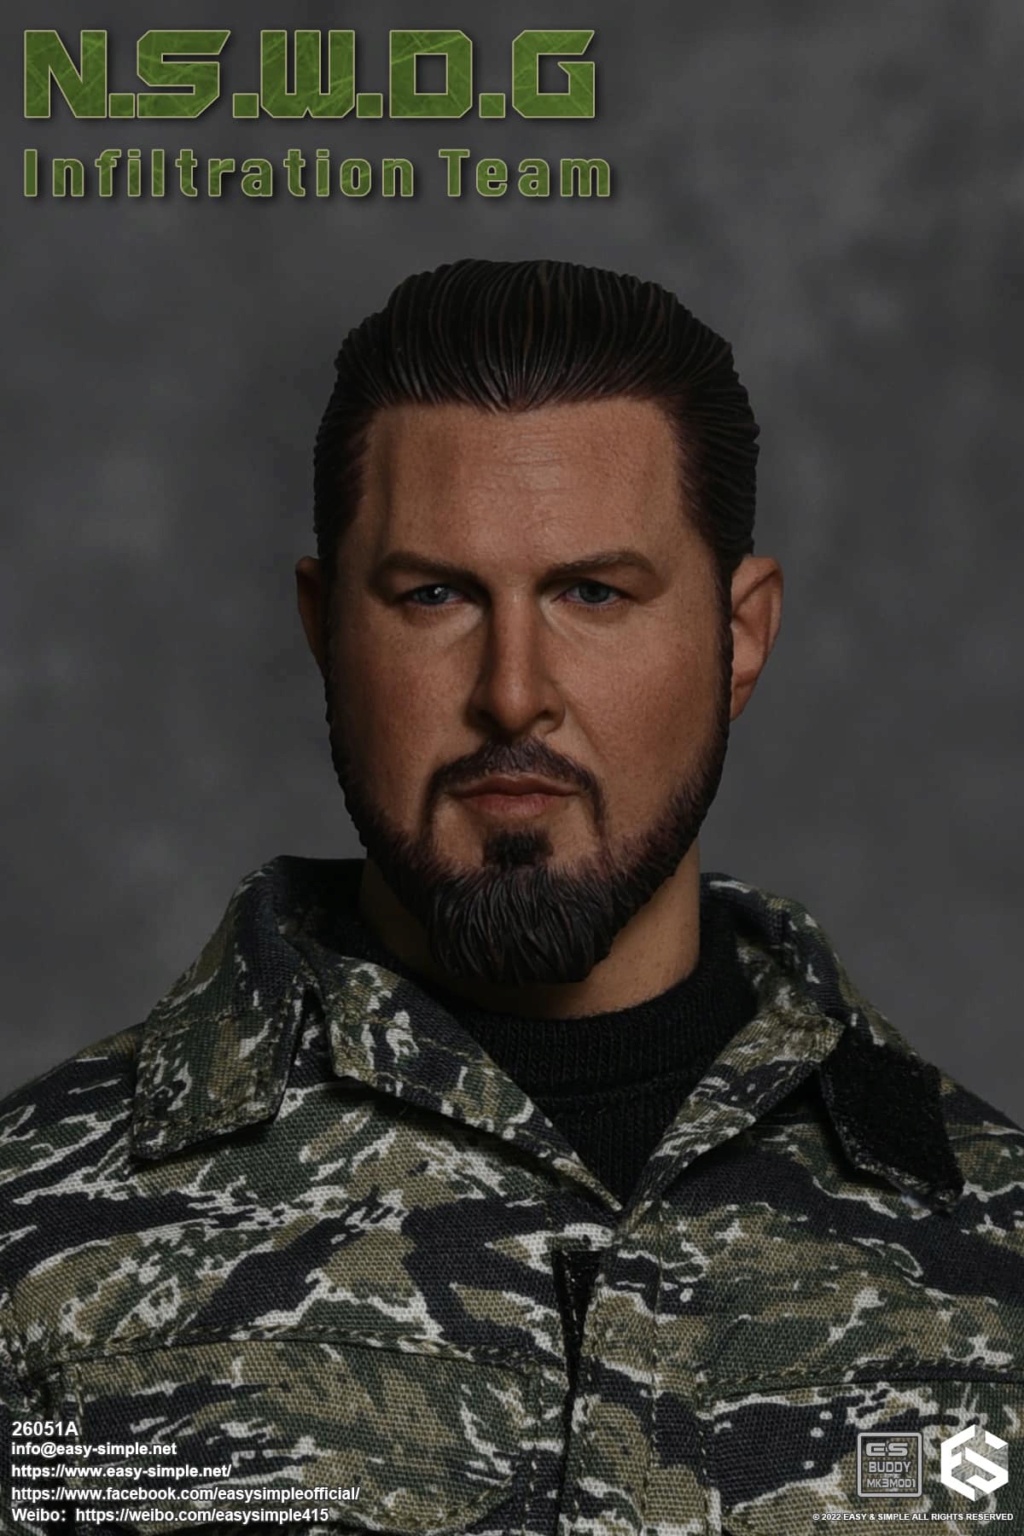 easy - NEW PRODUCT: EASY AND SIMPLE 1/6 SCALE FIGURE: N.S.W.D.G INFILTRATION TEAM - (2 Versions) 27124